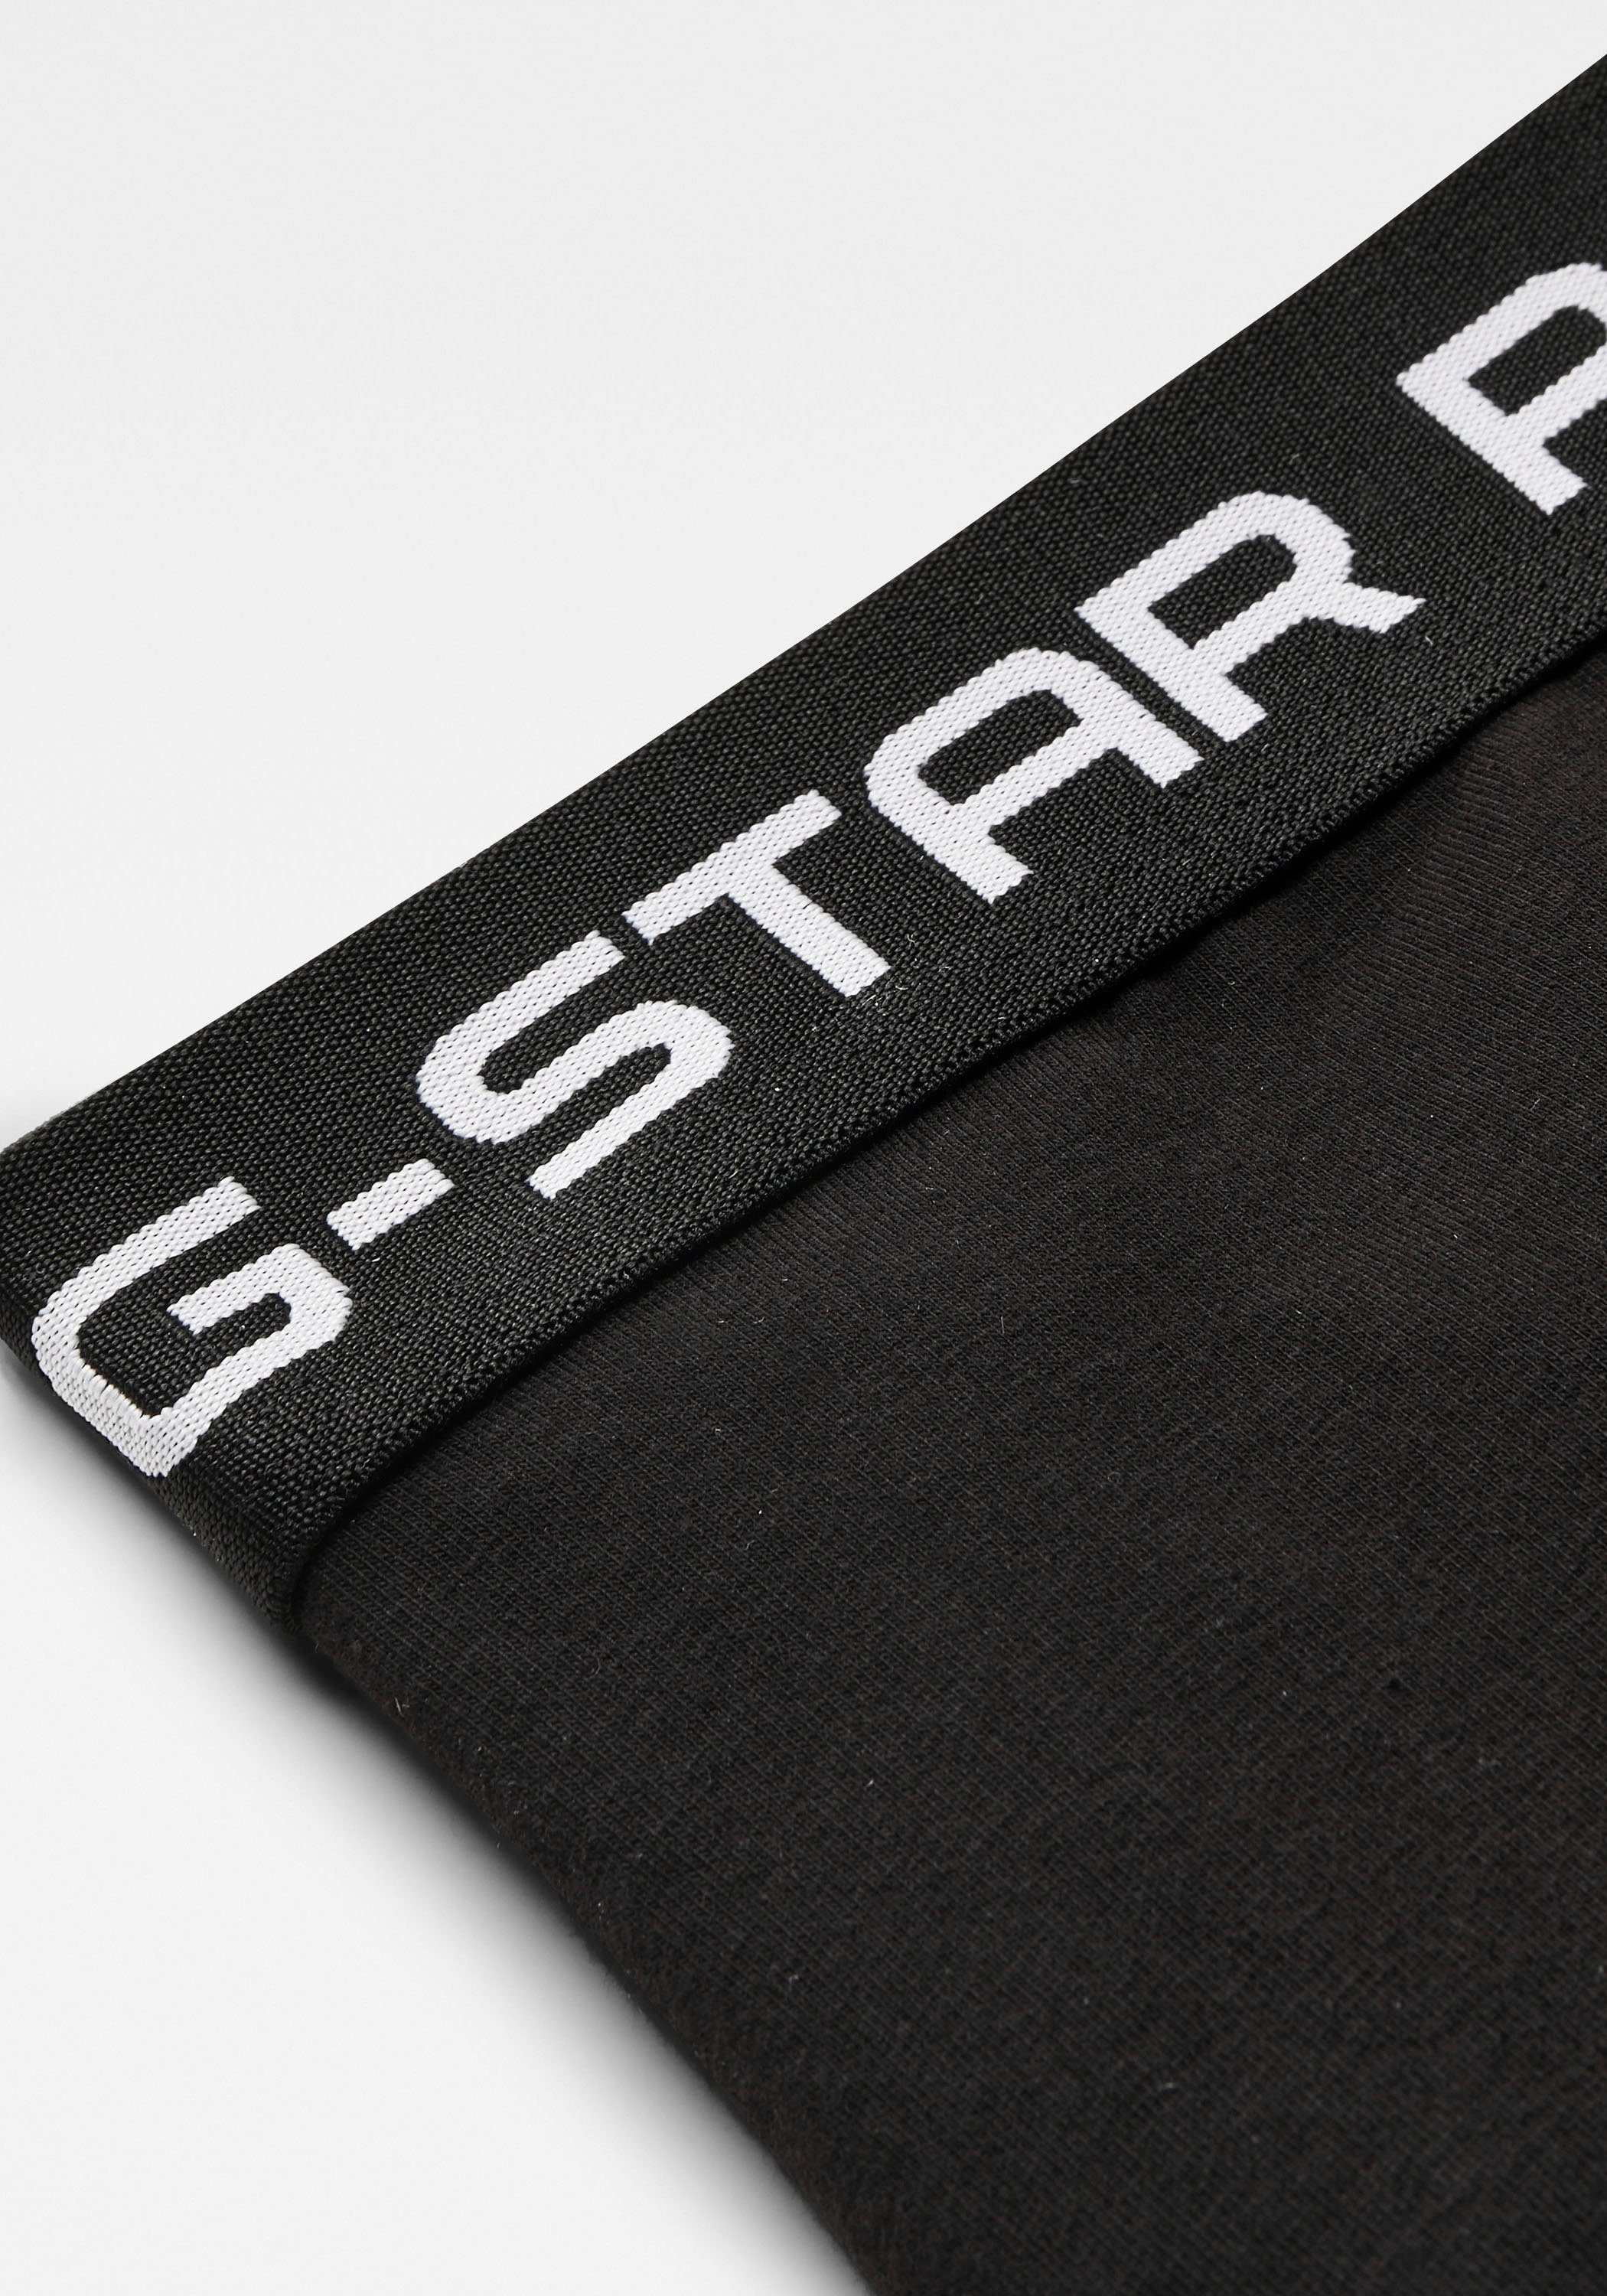 RAW G-Star (Packung, trunk Boxer Classic 3-St., 3er-Pack) schwarz pack 3